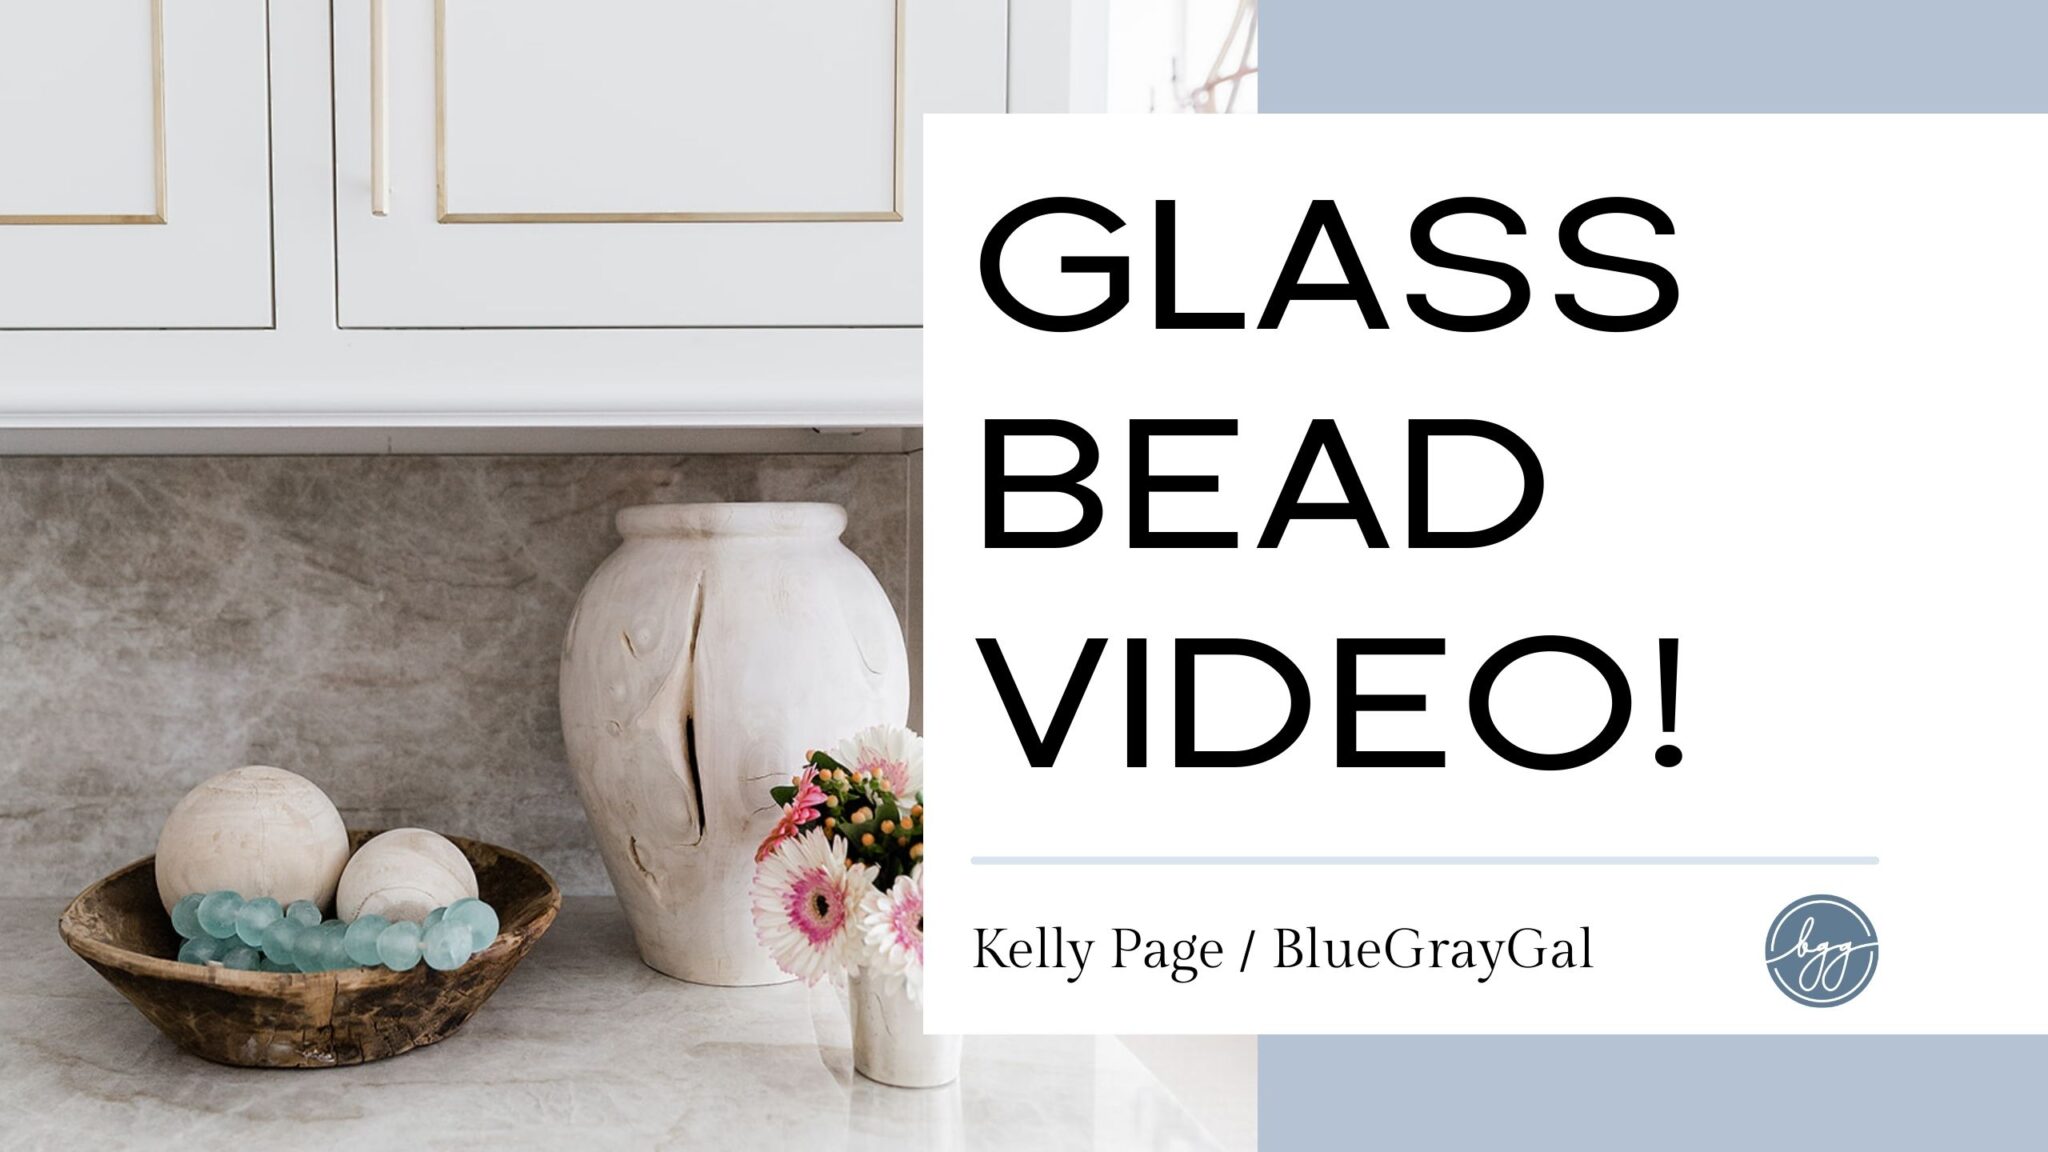 How to style a coffee table with glass beads